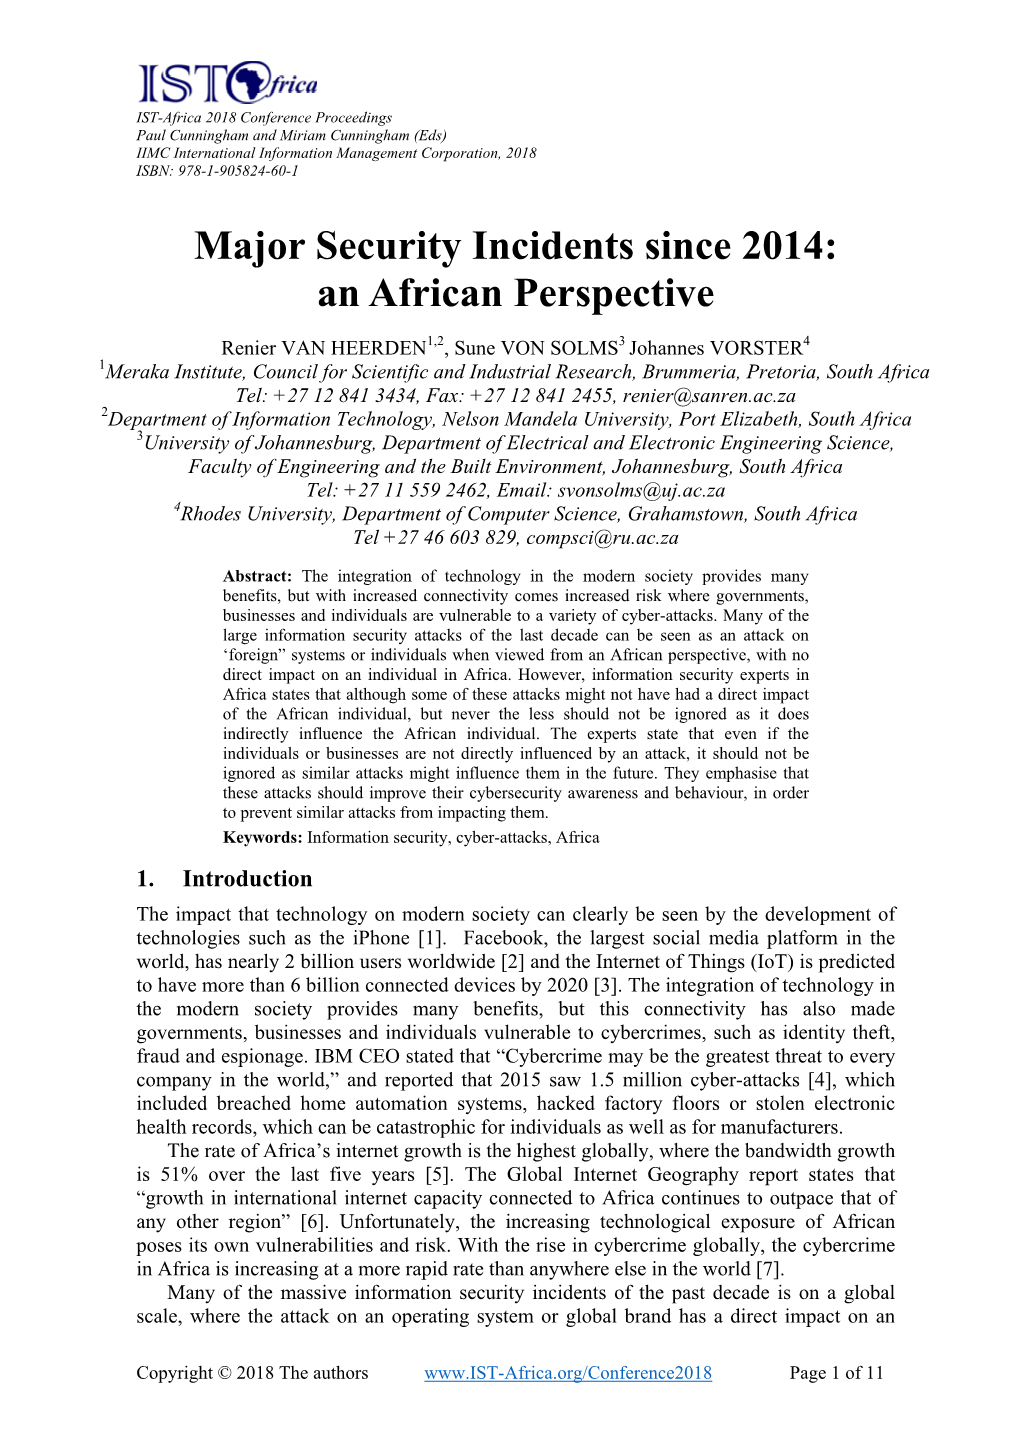 Major Security Incidents Since 2014: an African Perspective